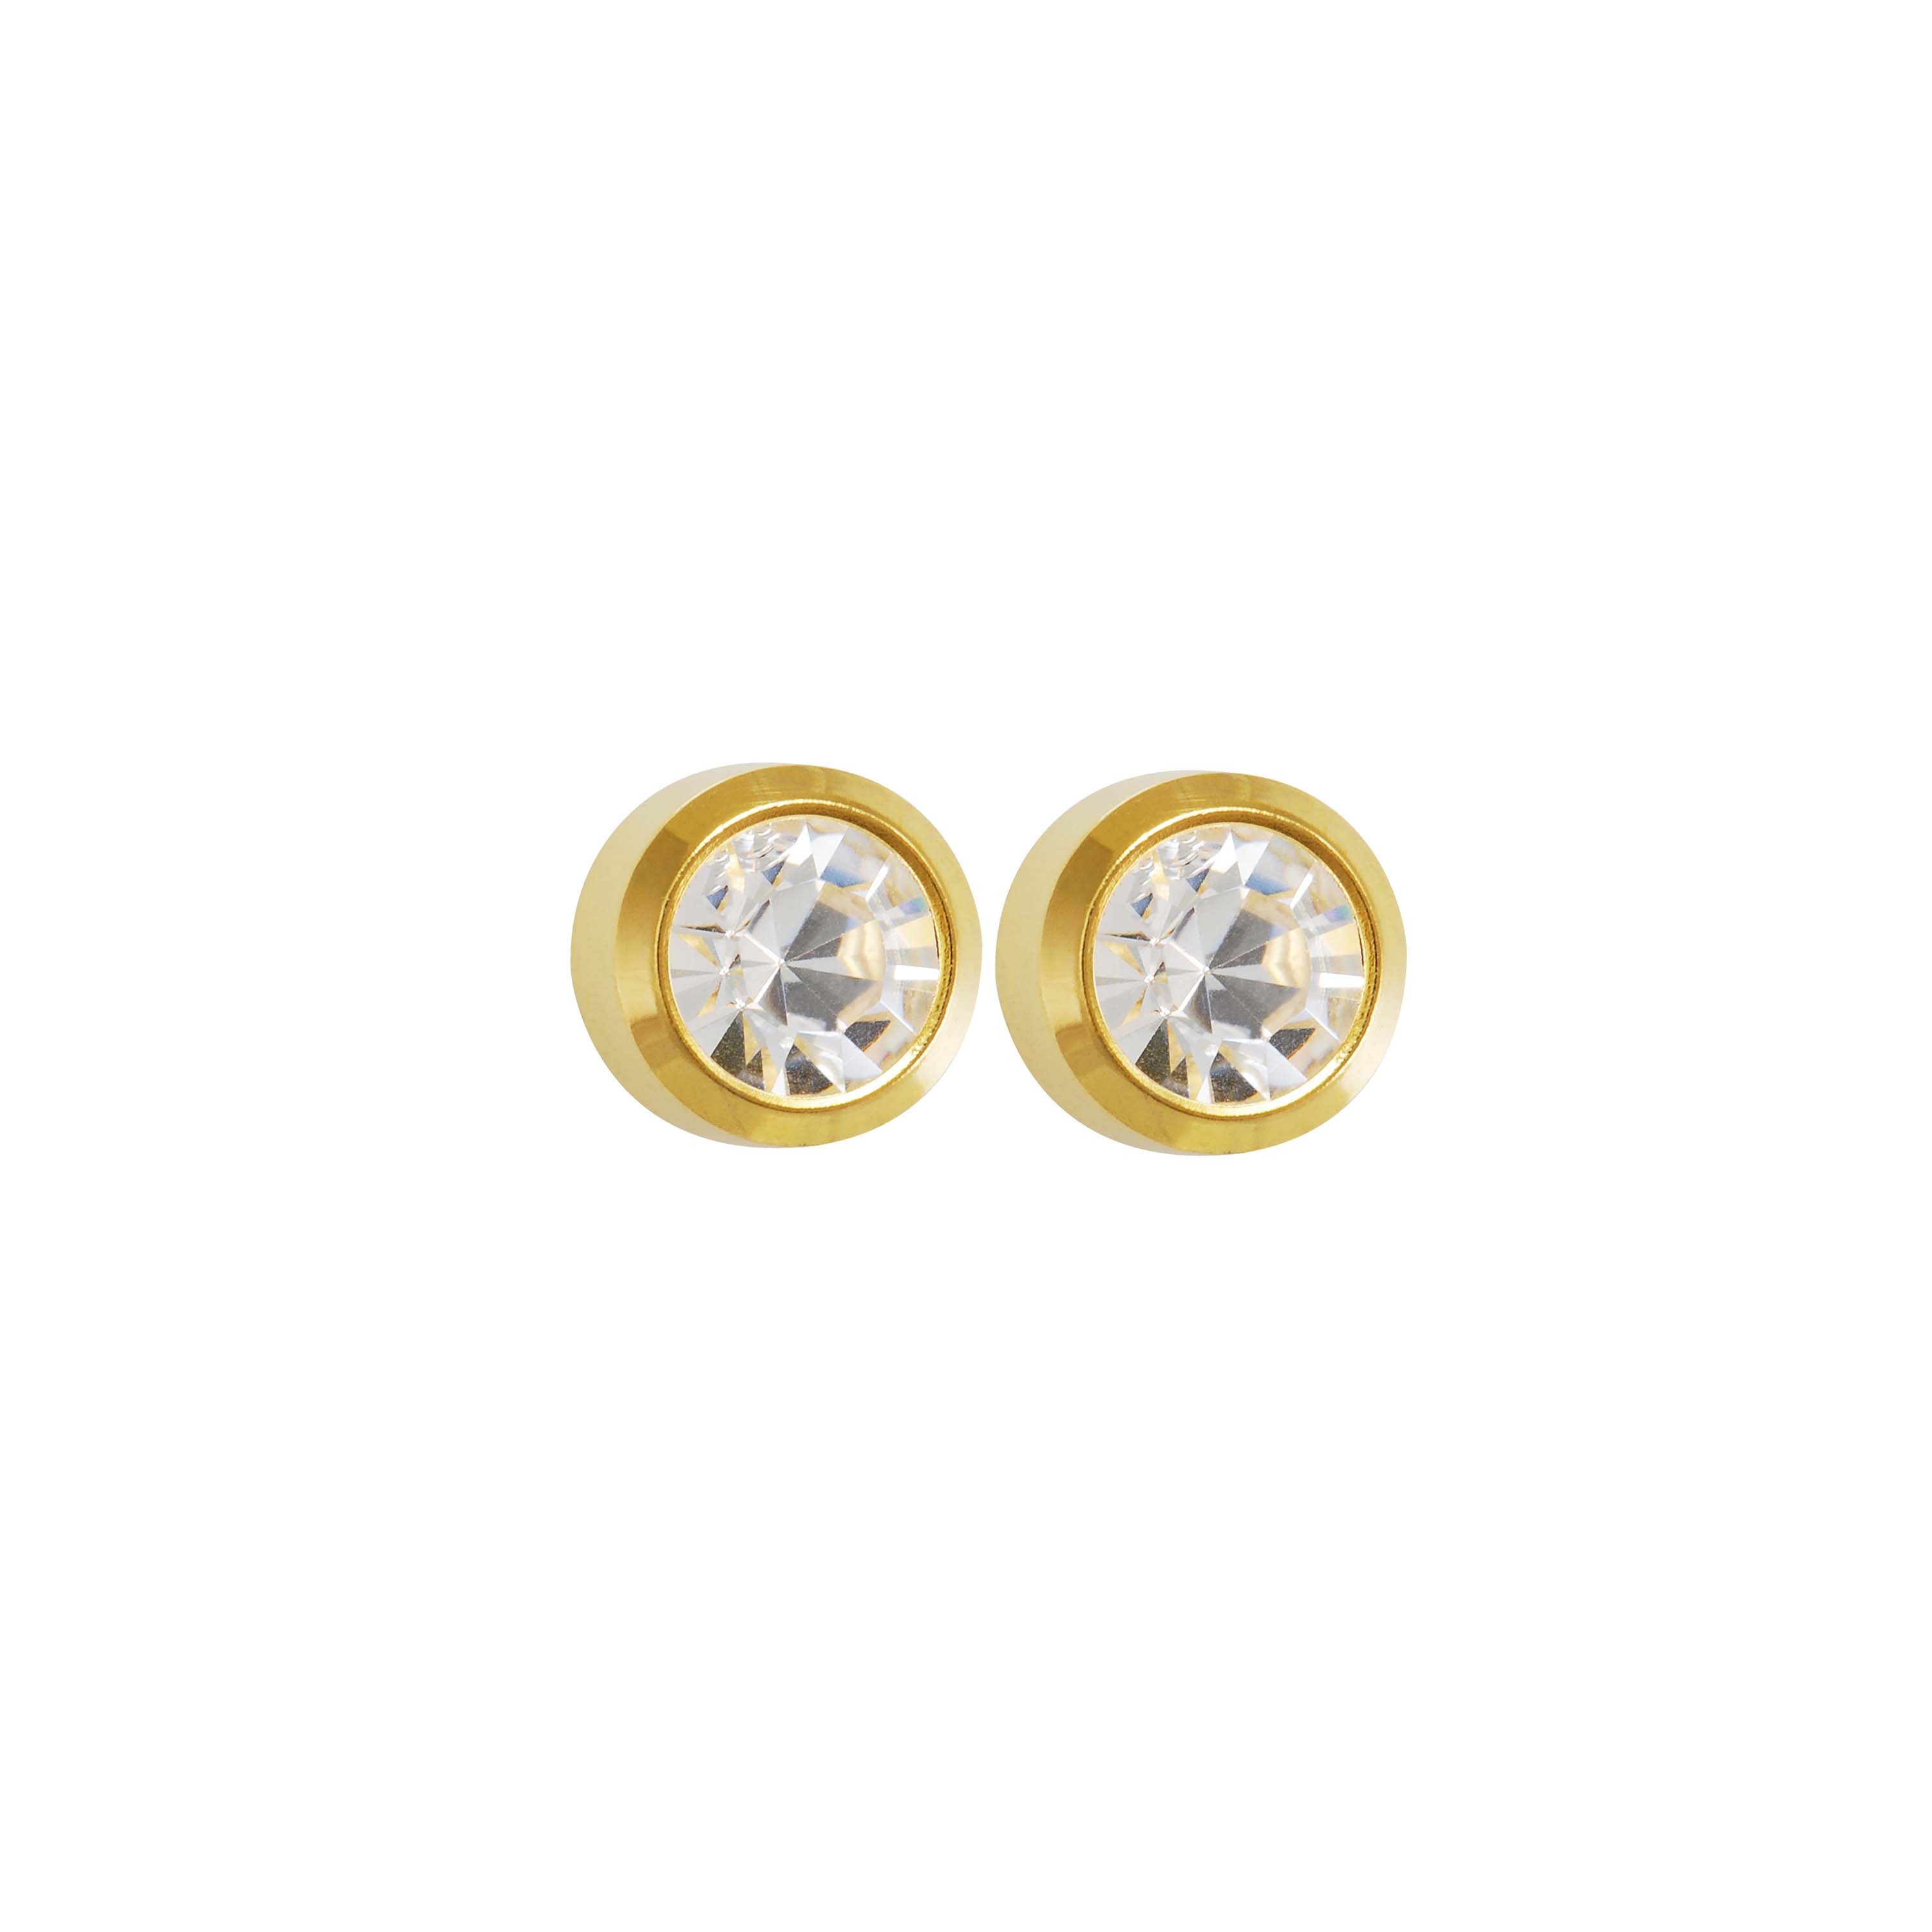 2MM - Bezel - April Crystal | 24K Gold Plated Piercing Stud Ear Studs come Fashion Earrings | Studex Select